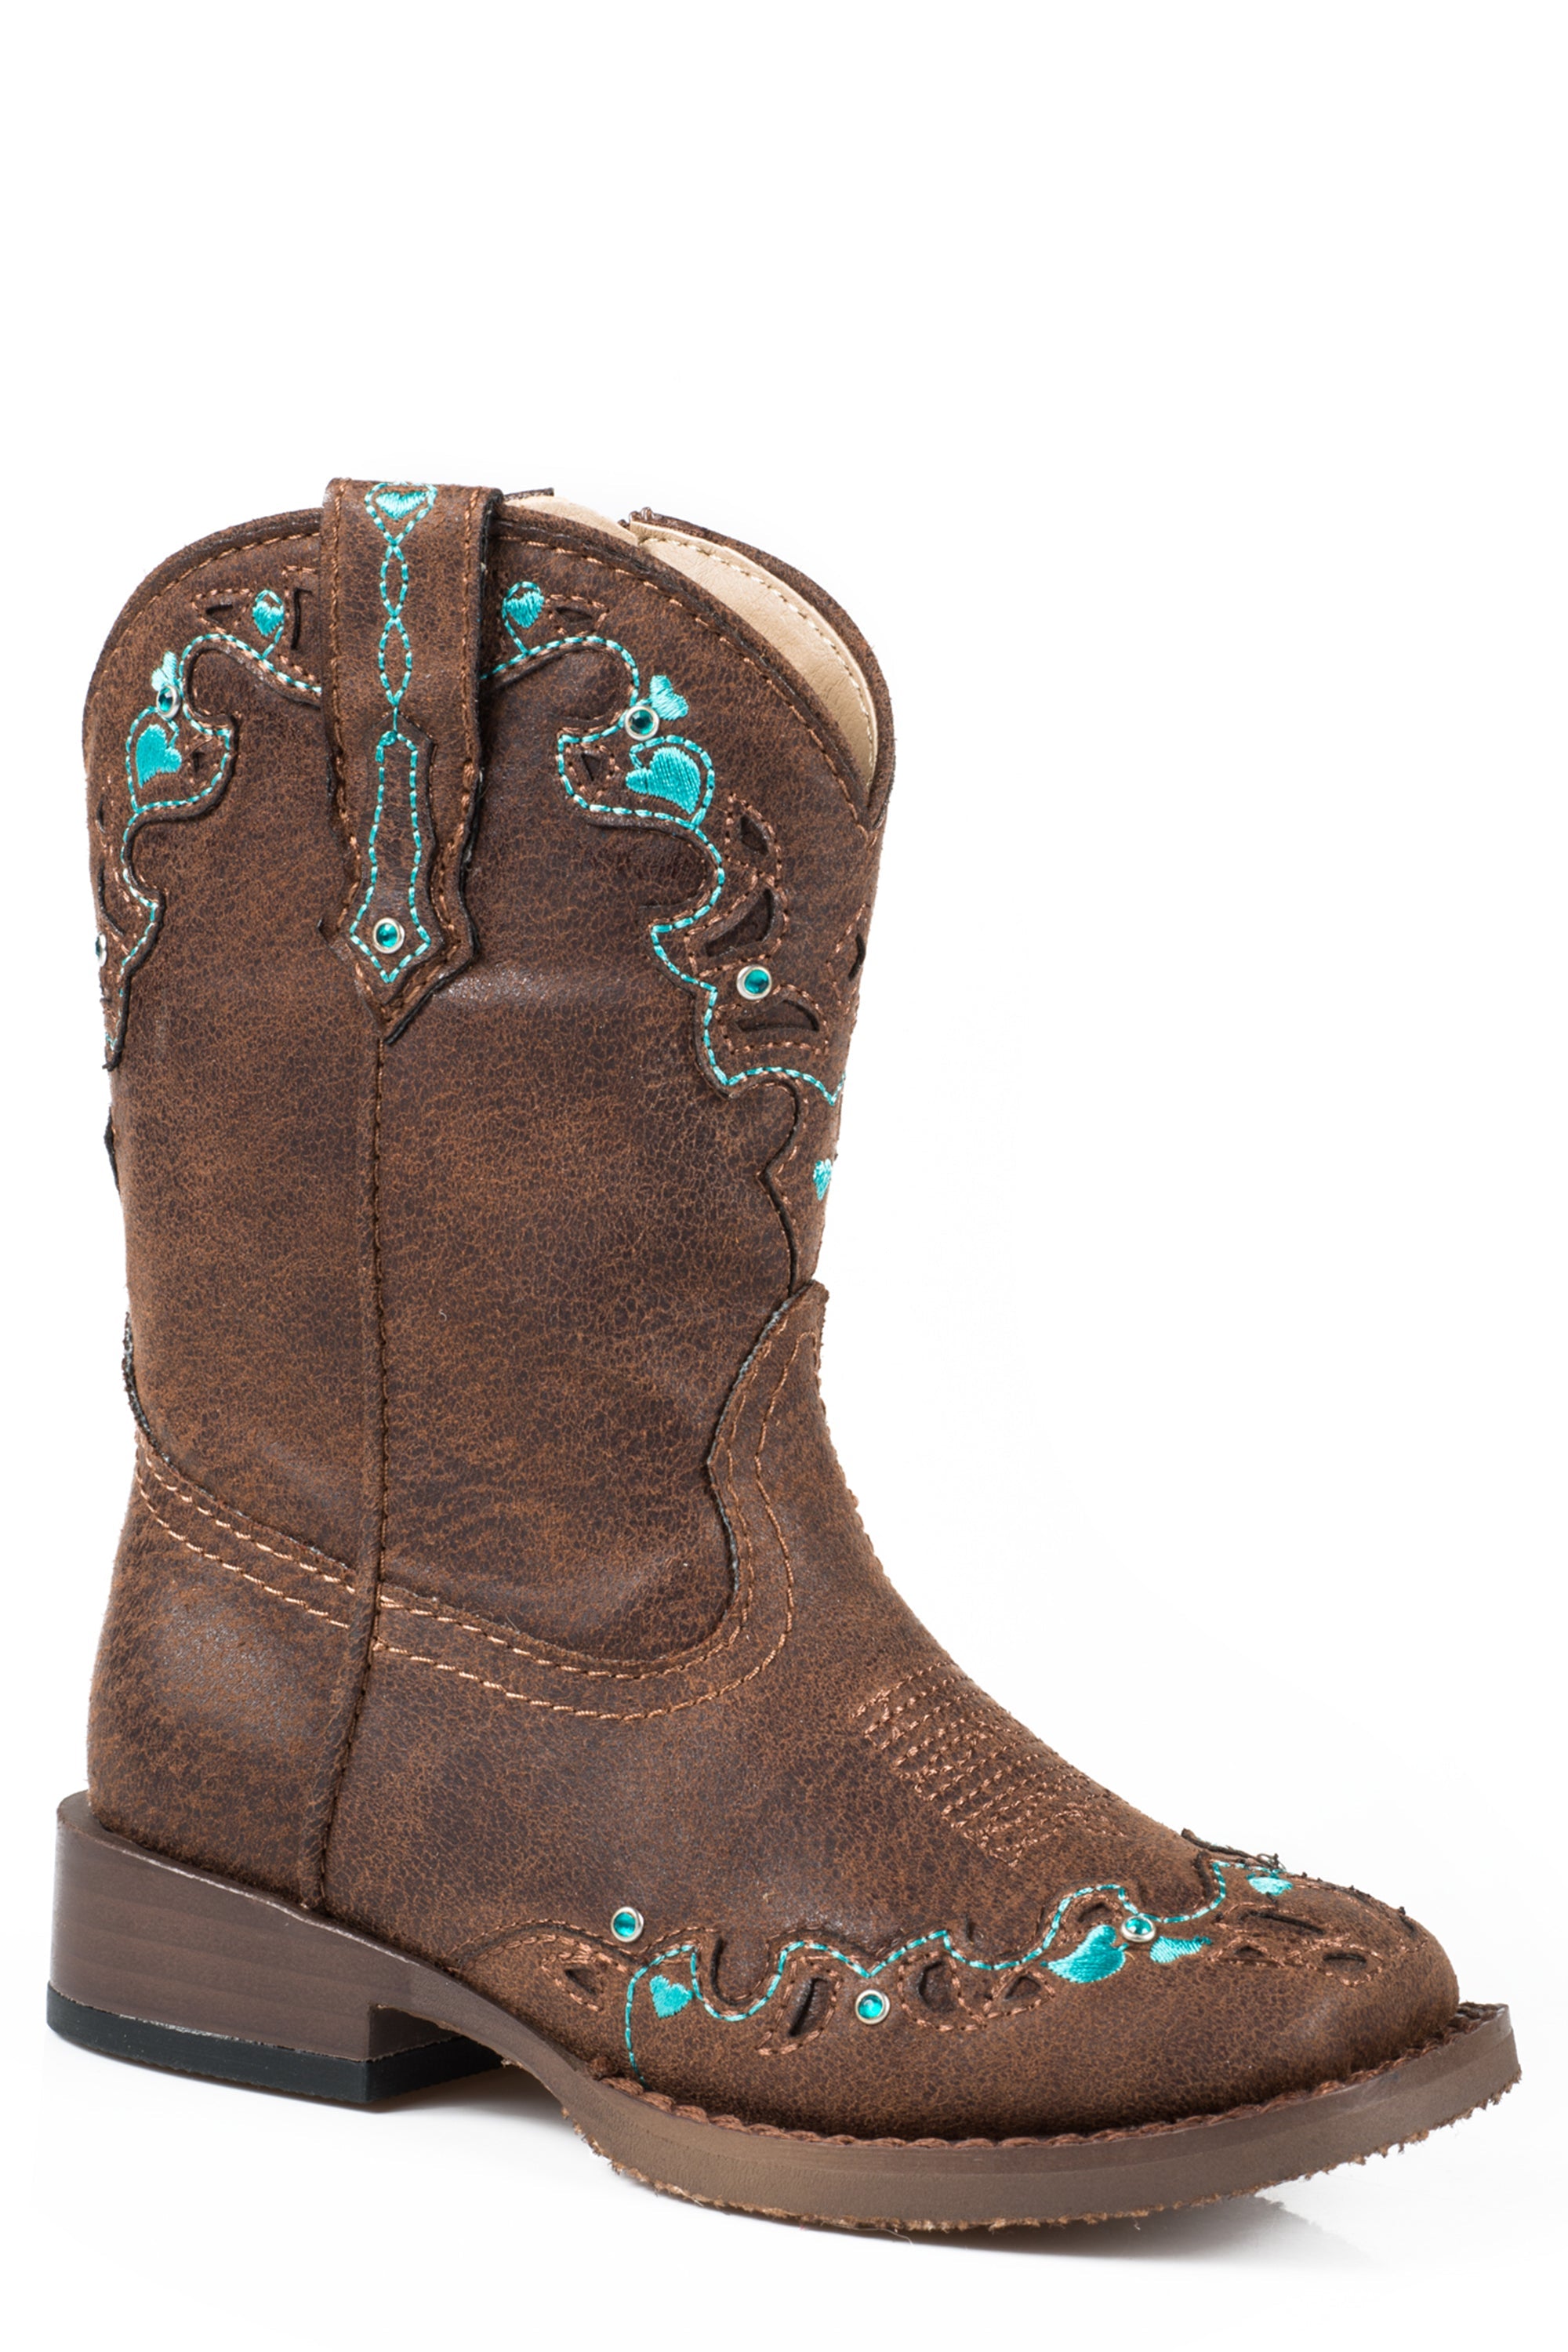 Roper Girls Toddler Brown Vintage With Turquoise Emboidery And Crystals